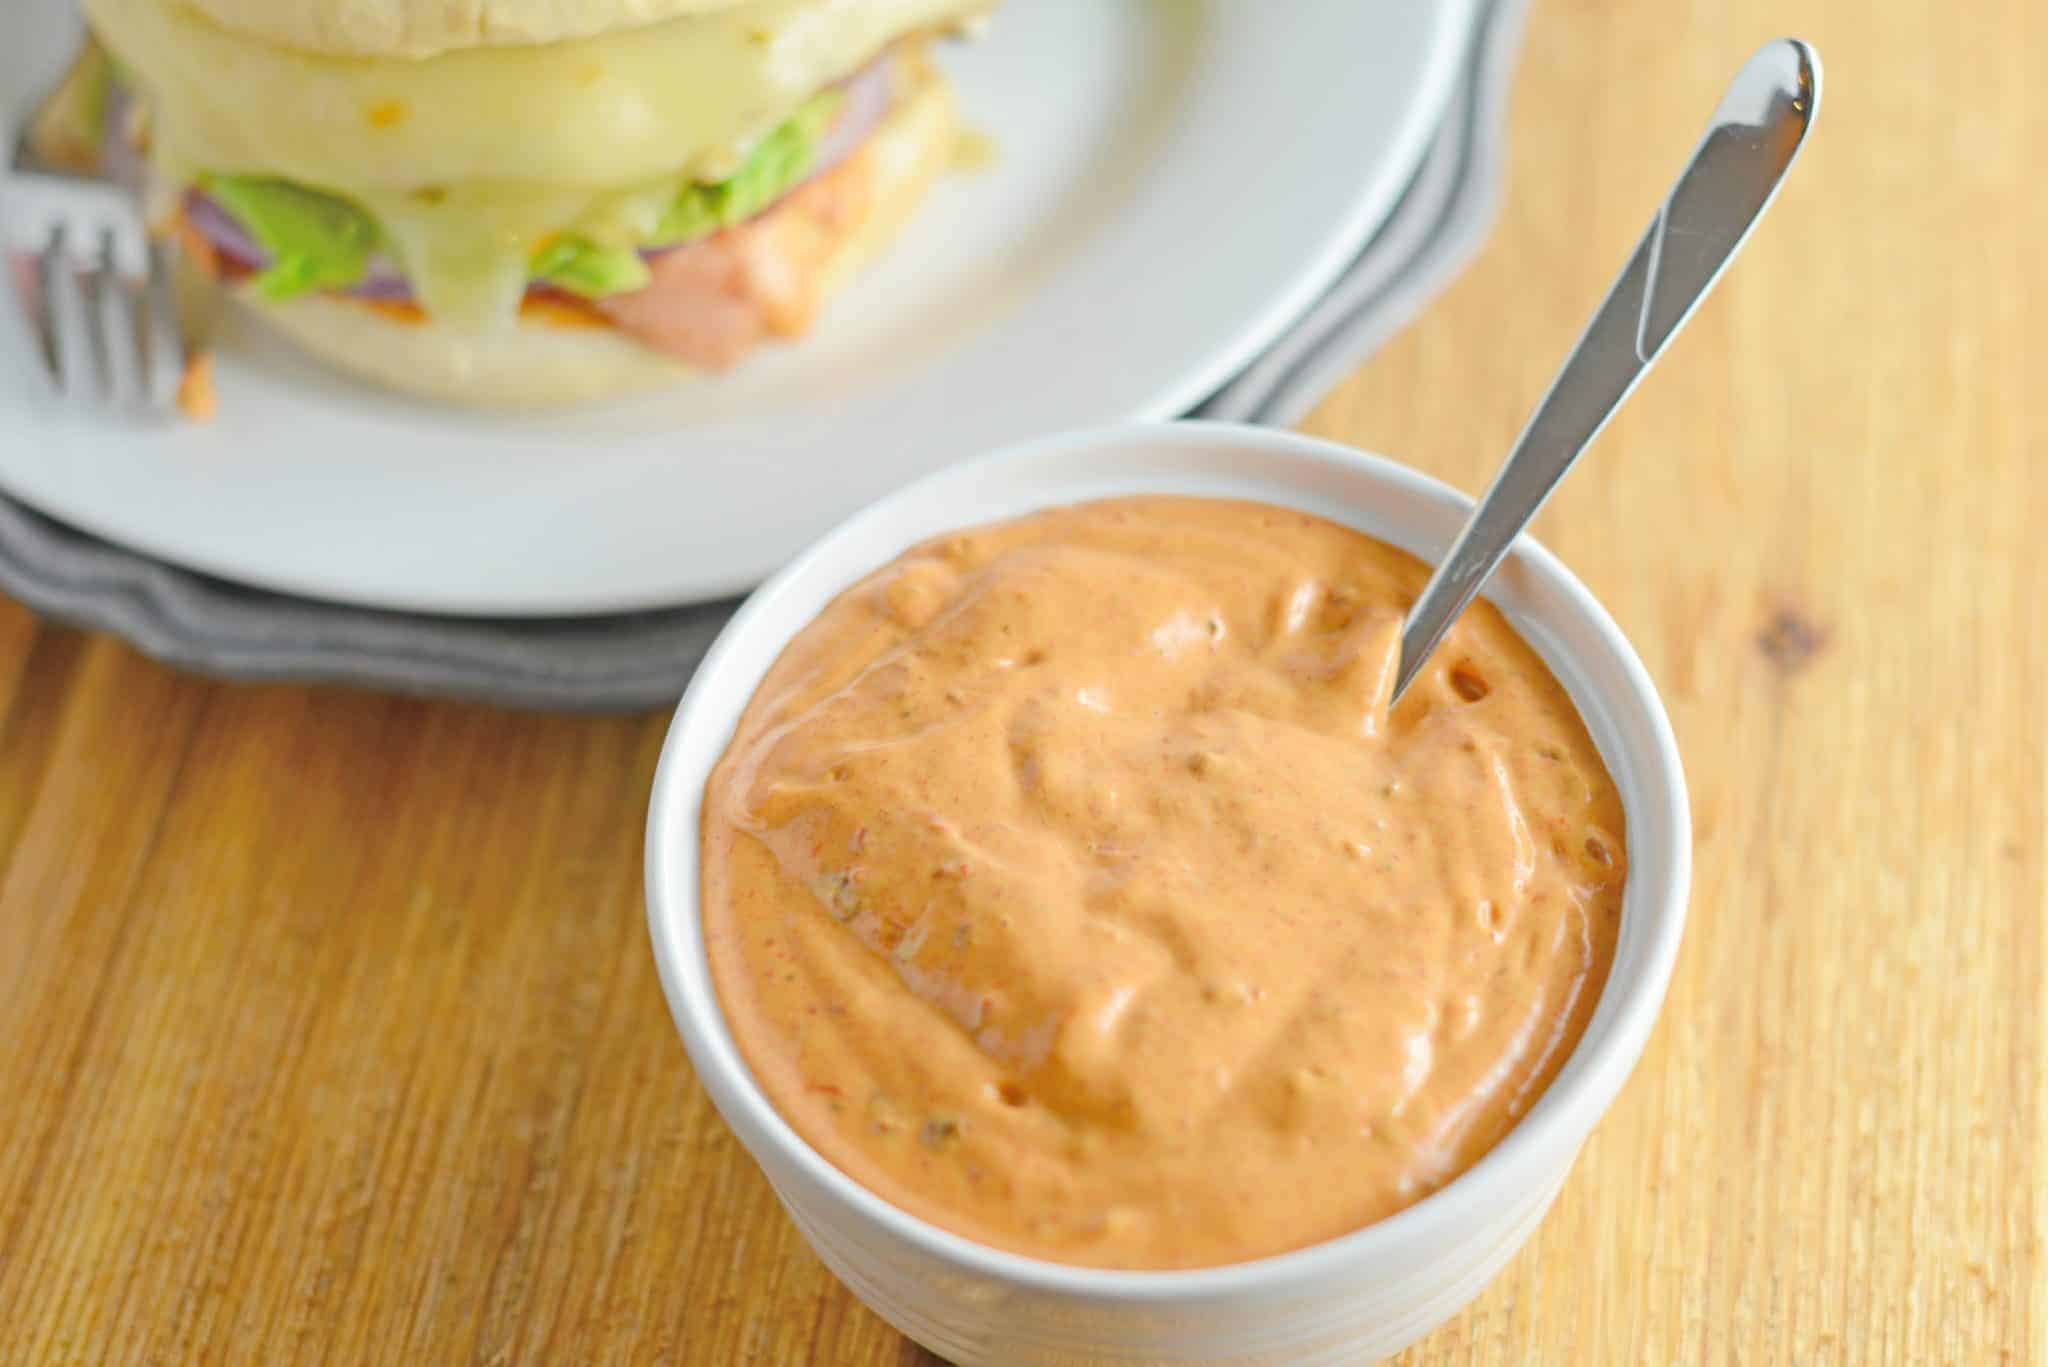 Spicy Chipotle Aioli Recipe Chipotle Mayo With 5 Ingredients,How To Store Basil